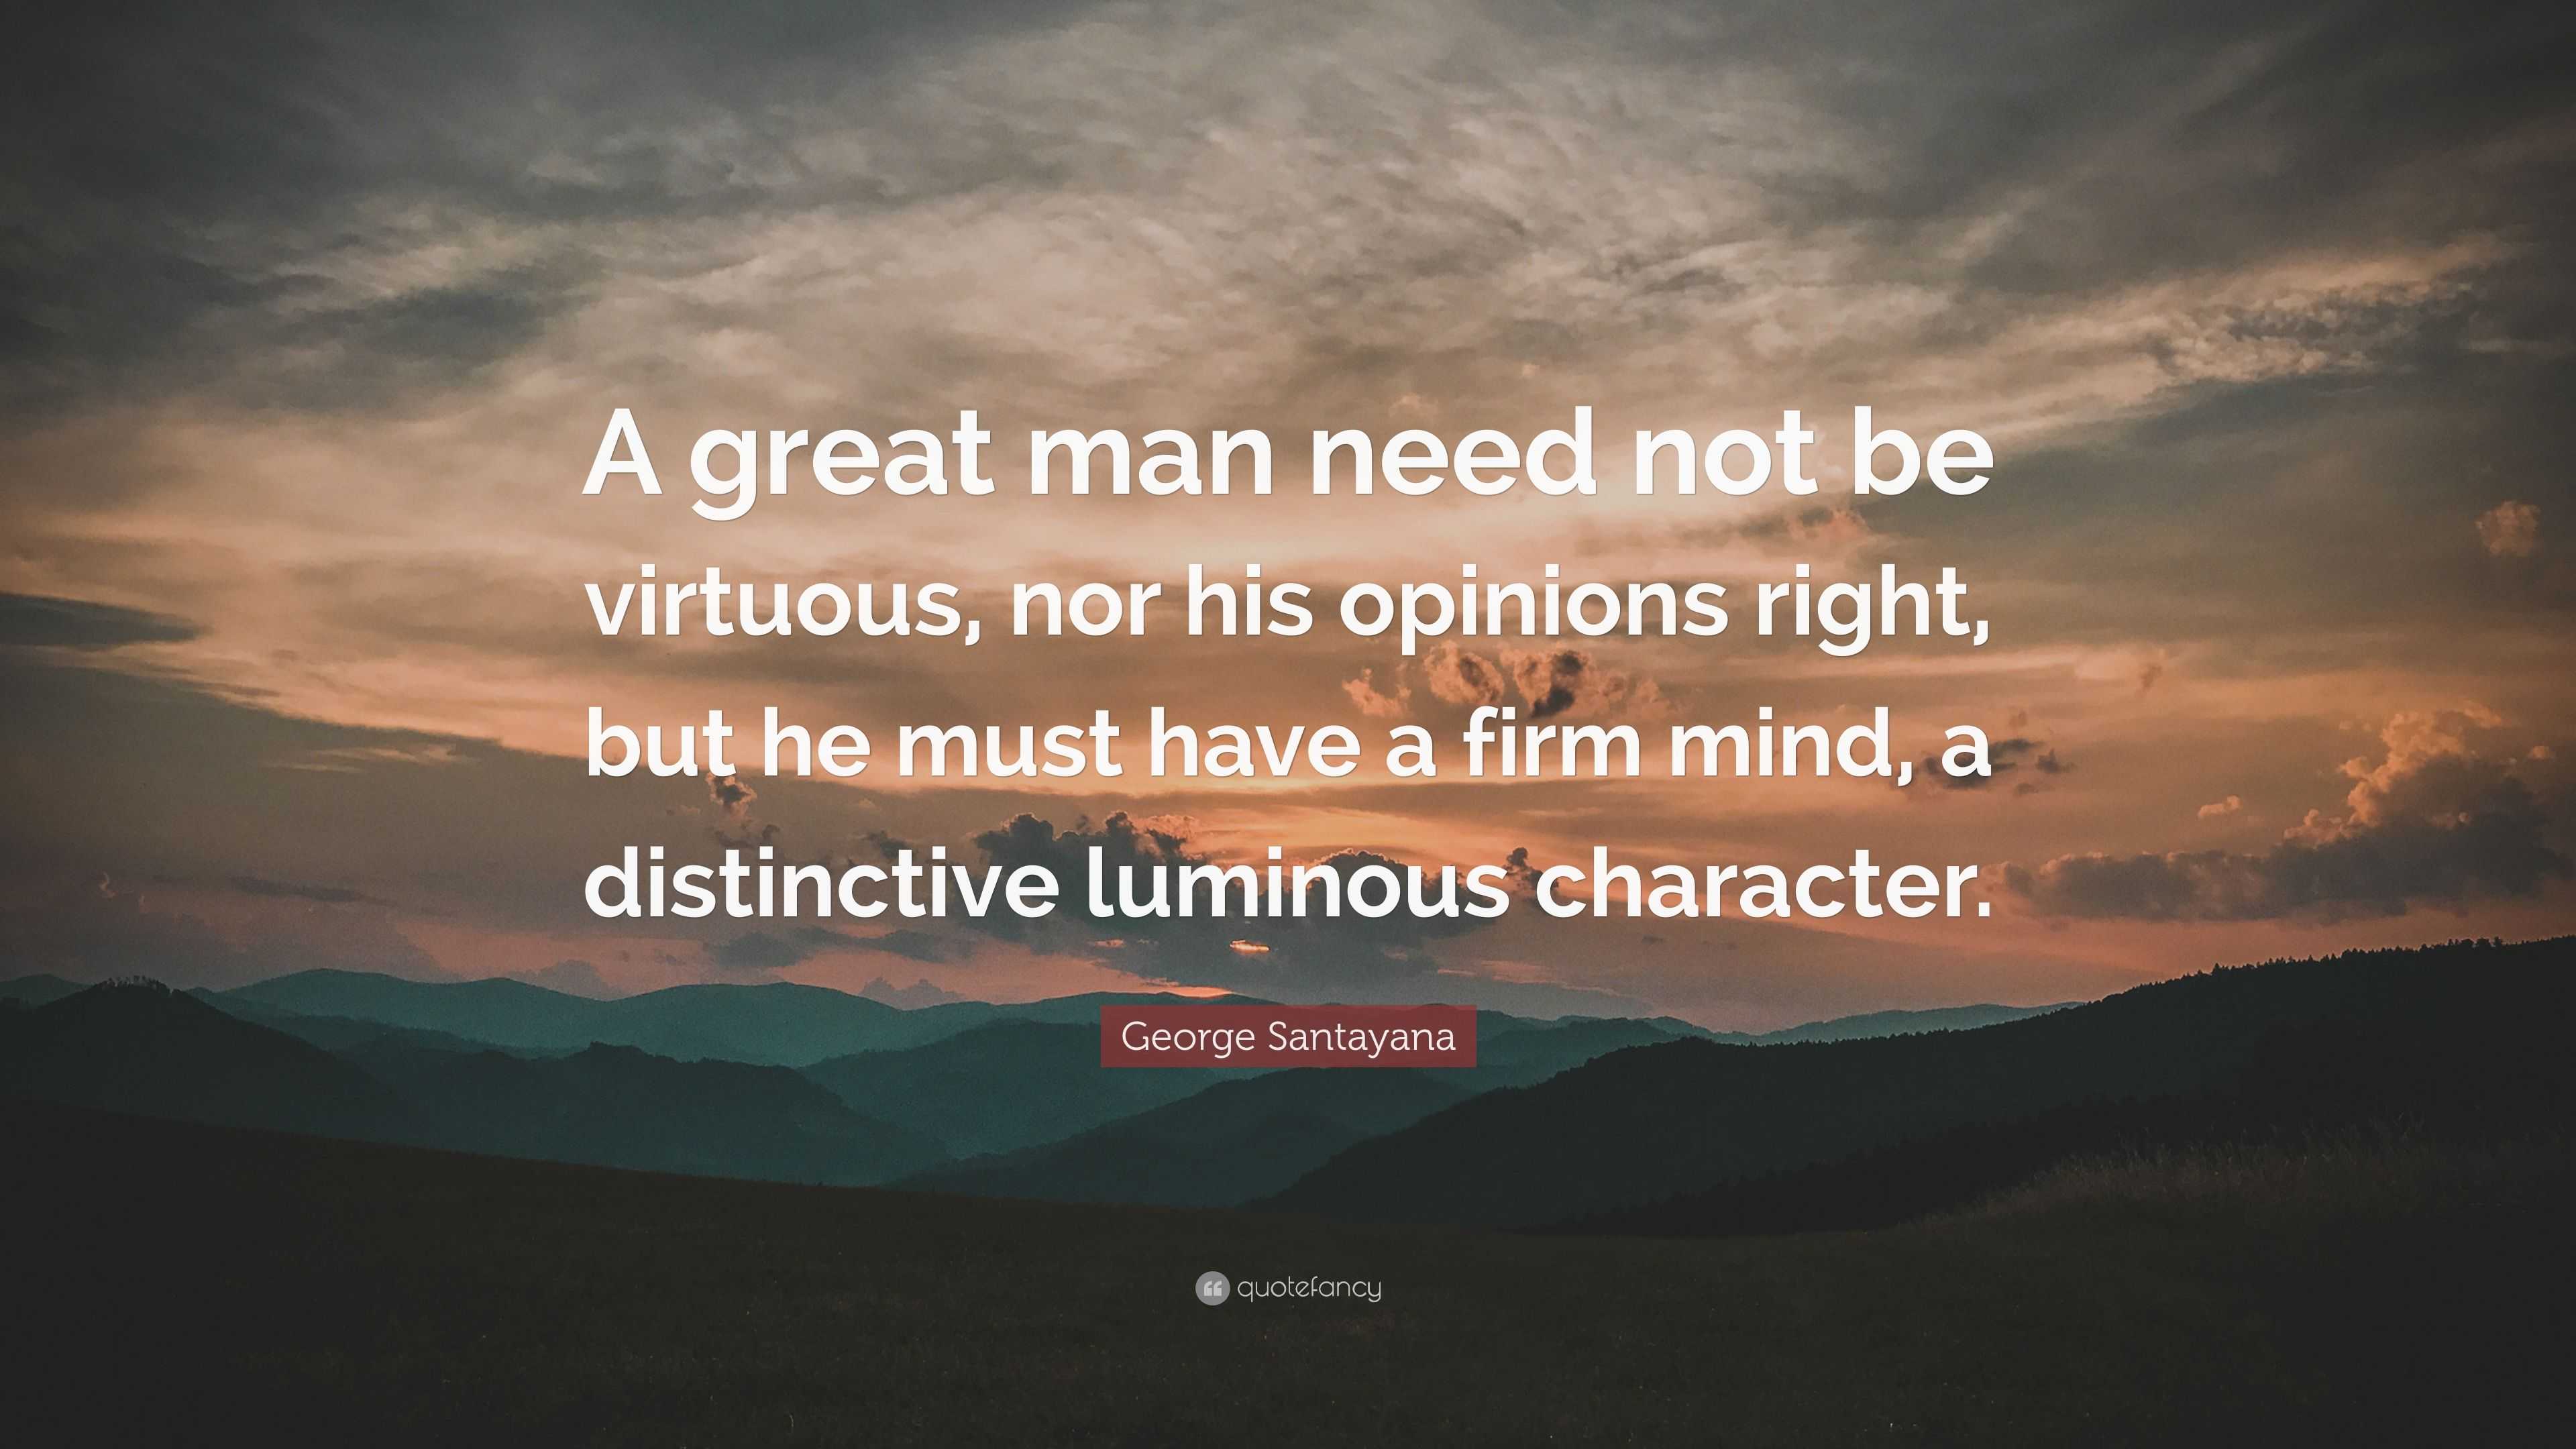 George Santayana Quote “a Great Man Need Not Be Virtuous Nor His Opinions Right But He Must